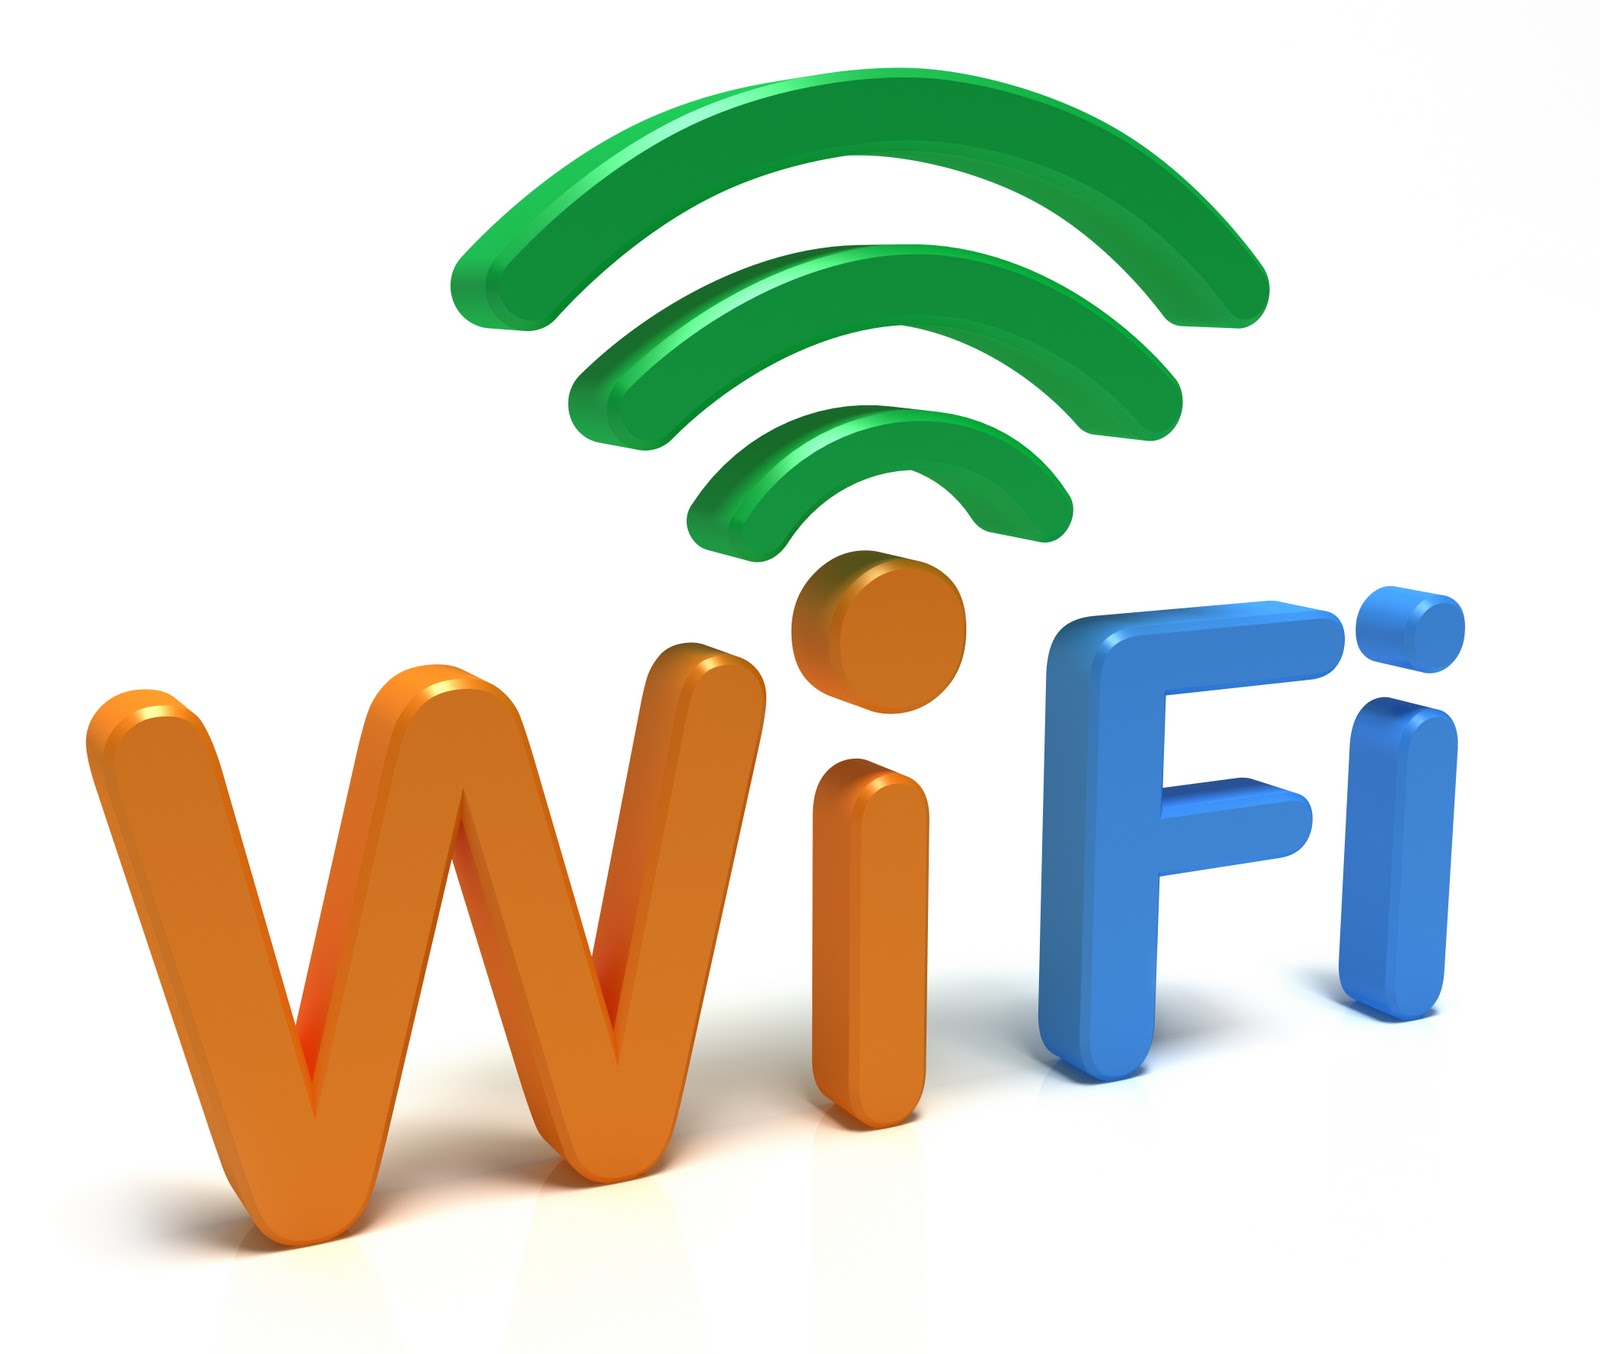 Easy solutions for WiFi connectivity problems